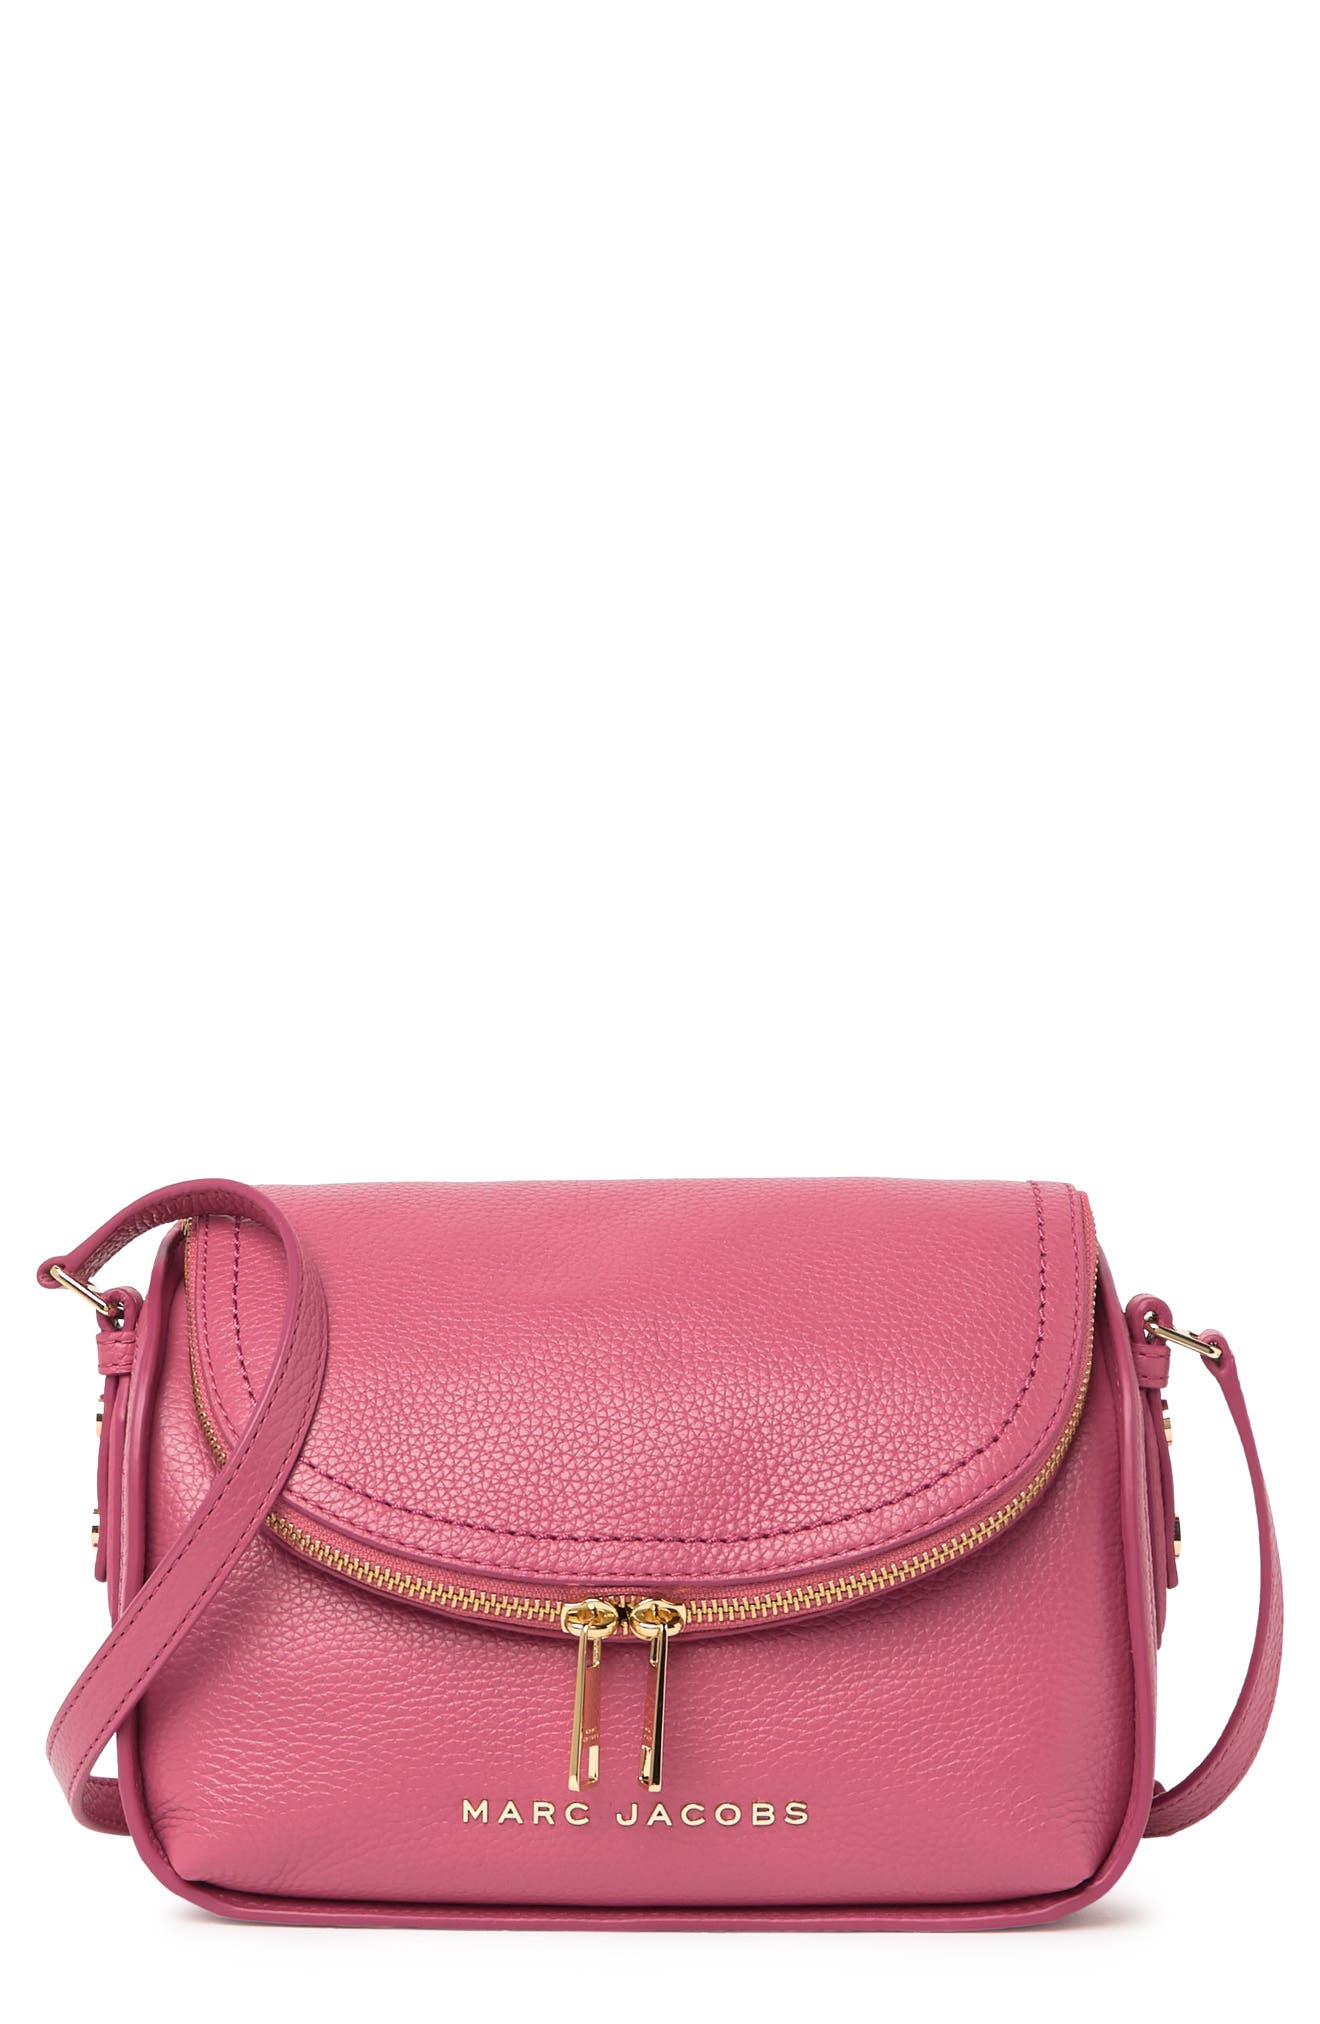 Marc Jacobs The Groove Leather Mini Messenger Bag In Dark Pink ModeSens